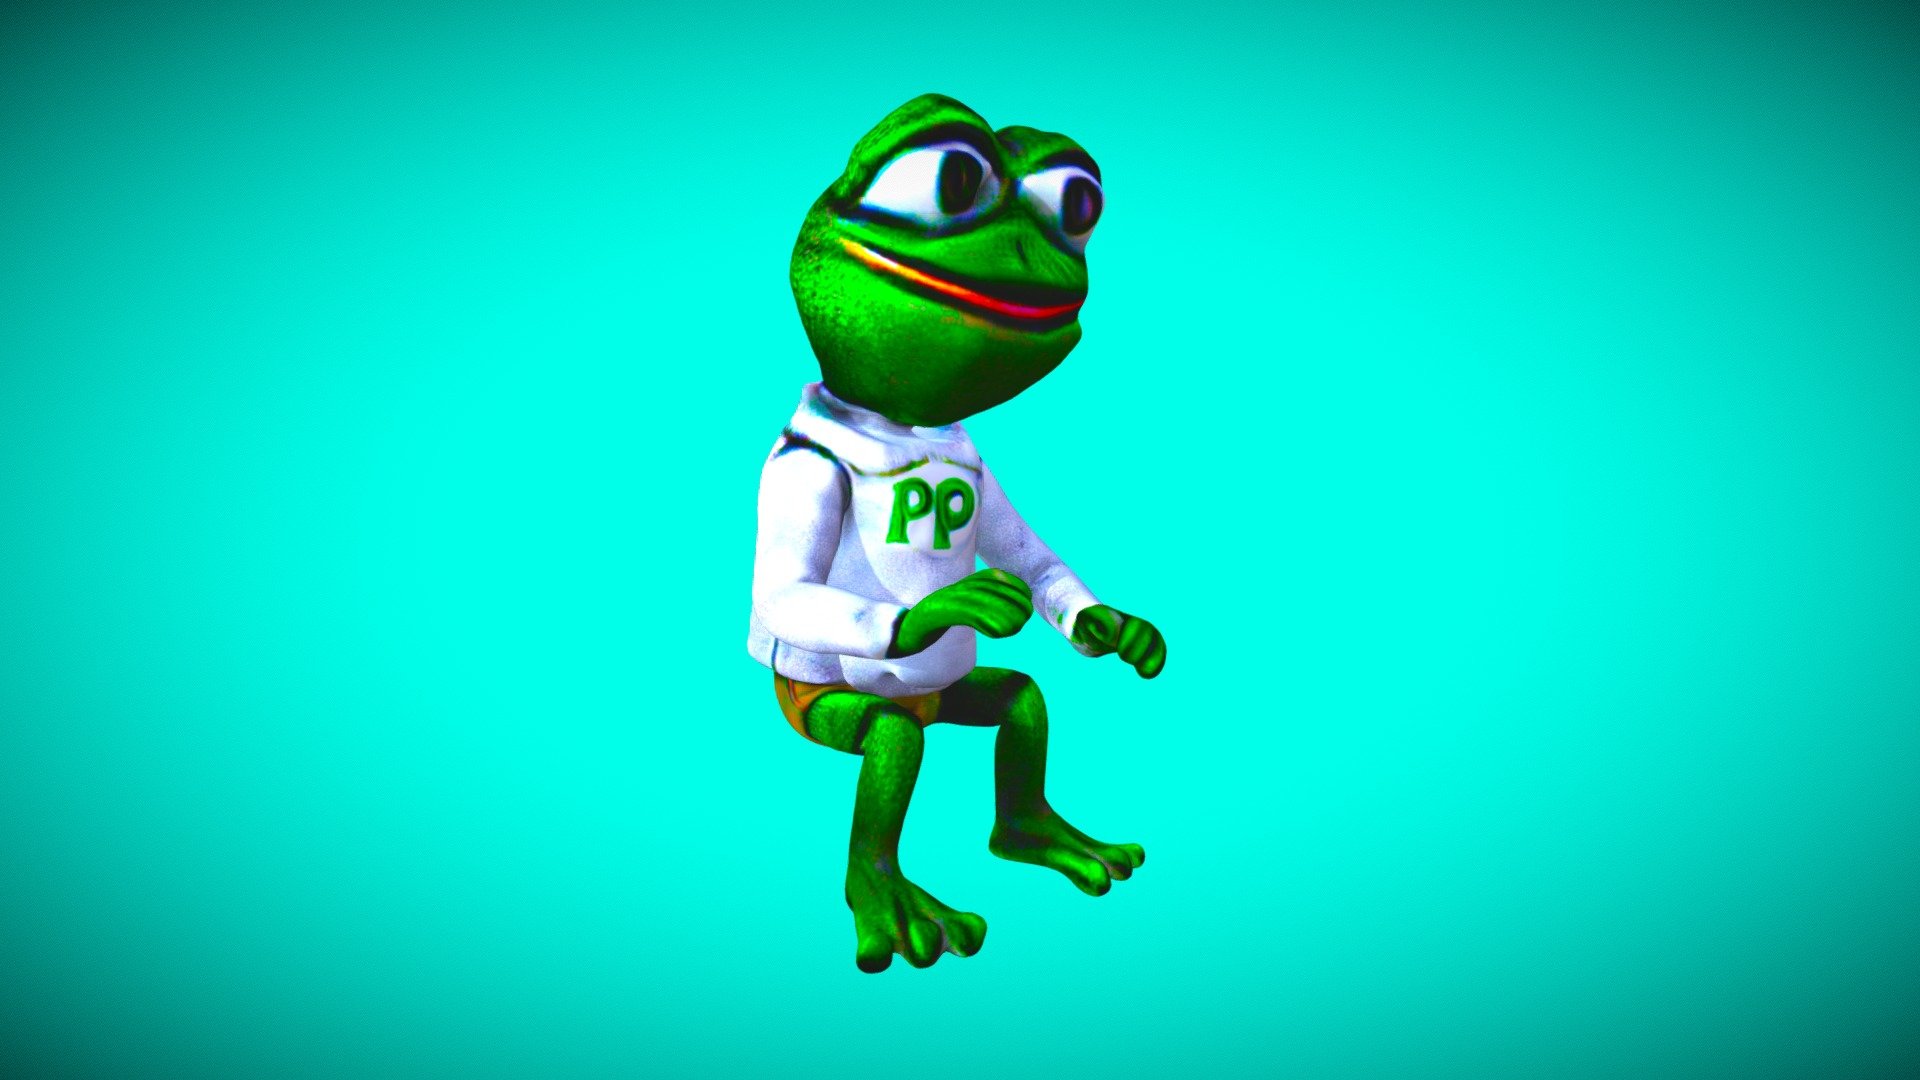 pepe the frog Sitting Clap (meme crypto) - Download Free 3D model by ...